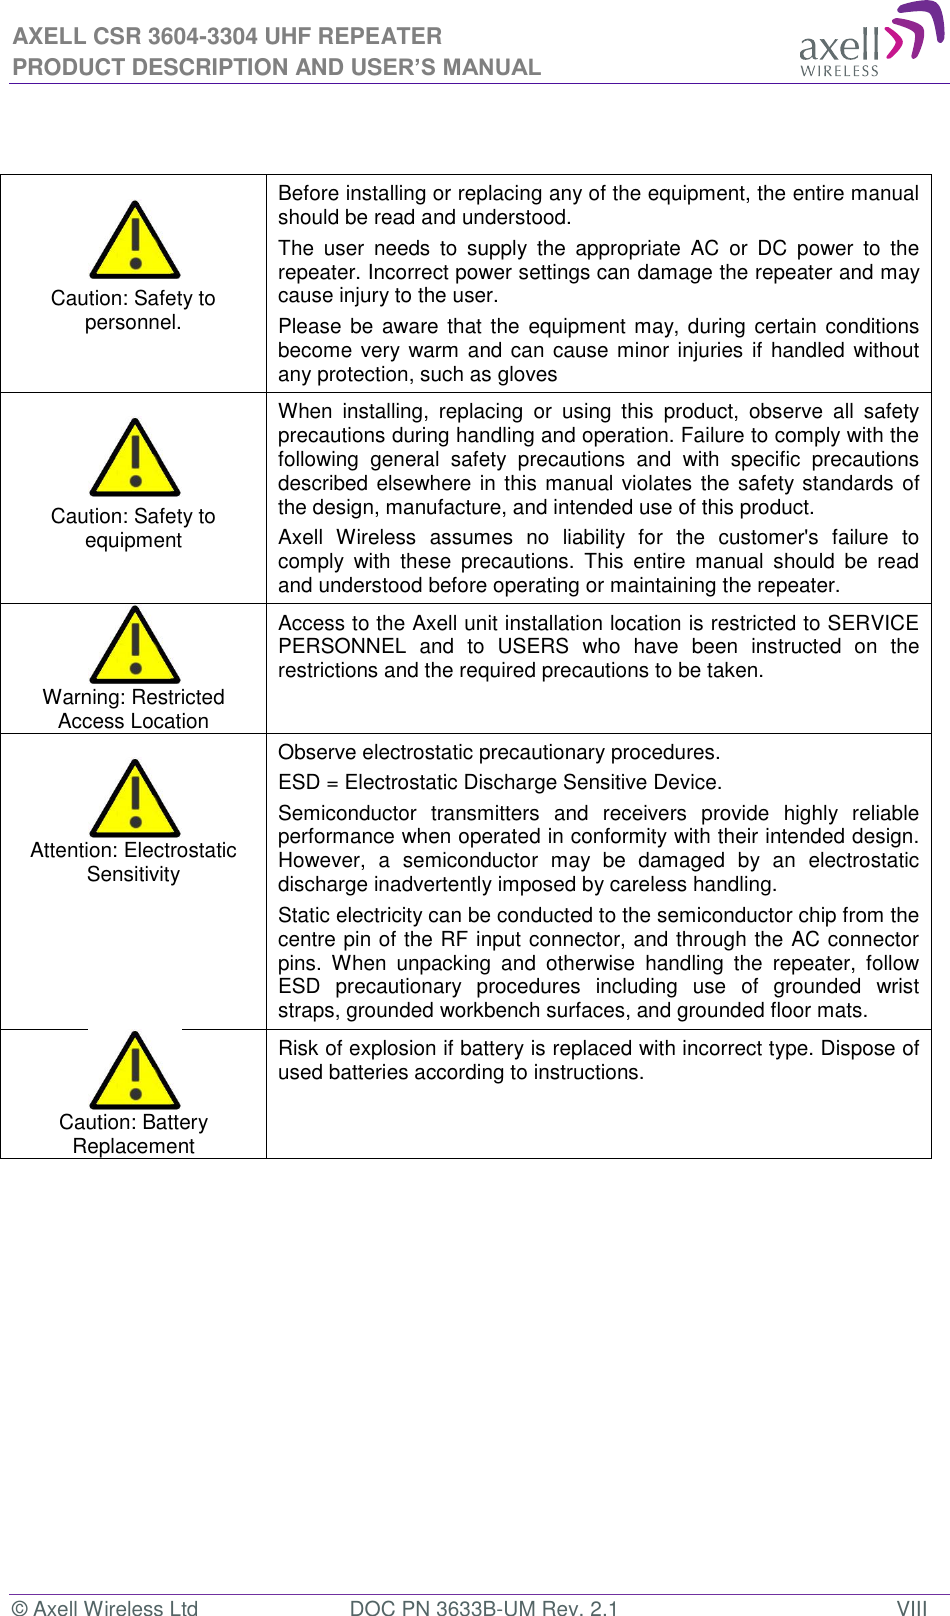 AXELL CSR 3604-3304 UHF REPEATER PRODUCT DESCRIPTION AND USER’S MANUAL © Axell Wireless Ltd  DOC PN 3633B-UM Rev. 2.1  VIII                 Caution: Safety to personnel. Before installing or replacing any of the equipment, the entire manual should be read and understood. The  user  needs  to  supply  the  appropriate  AC  or  DC  power  to  the repeater. Incorrect power settings can damage the repeater and may cause injury to the user. Please be aware that the  equipment may, during certain conditions become very warm and can cause minor injuries if handled without any protection, such as gloves   Caution: Safety to equipment When  installing,  replacing  or  using  this  product,  observe  all  safety precautions during handling and operation. Failure to comply with the following  general  safety  precautions  and  with  specific  precautions described elsewhere in this manual violates the safety standards of the design, manufacture, and intended use of this product.  Axell  Wireless  assumes  no  liability  for  the  customer&apos;s  failure  to comply  with  these  precautions.  This  entire  manual  should  be  read and understood before operating or maintaining the repeater.  Warning: Restricted Access Location Access to the Axell unit installation location is restricted to SERVICE PERSONNEL  and  to  USERS  who  have  been  instructed  on  the restrictions and the required precautions to be taken.   Attention: Electrostatic Sensitivity  Observe electrostatic precautionary procedures. ESD = Electrostatic Discharge Sensitive Device.  Semiconductor  transmitters  and  receivers  provide  highly  reliable performance when operated in conformity with their intended design. However,  a  semiconductor  may  be  damaged  by  an  electrostatic discharge inadvertently imposed by careless handling. Static electricity can be conducted to the semiconductor chip from the centre pin of the RF input connector, and through the AC connector pins.  When  unpacking  and  otherwise  handling  the  repeater,  follow ESD  precautionary  procedures  including  use  of  grounded  wrist straps, grounded workbench surfaces, and grounded floor mats.  Caution: Battery Replacement Risk of explosion if battery is replaced with incorrect type. Dispose of used batteries according to instructions. 